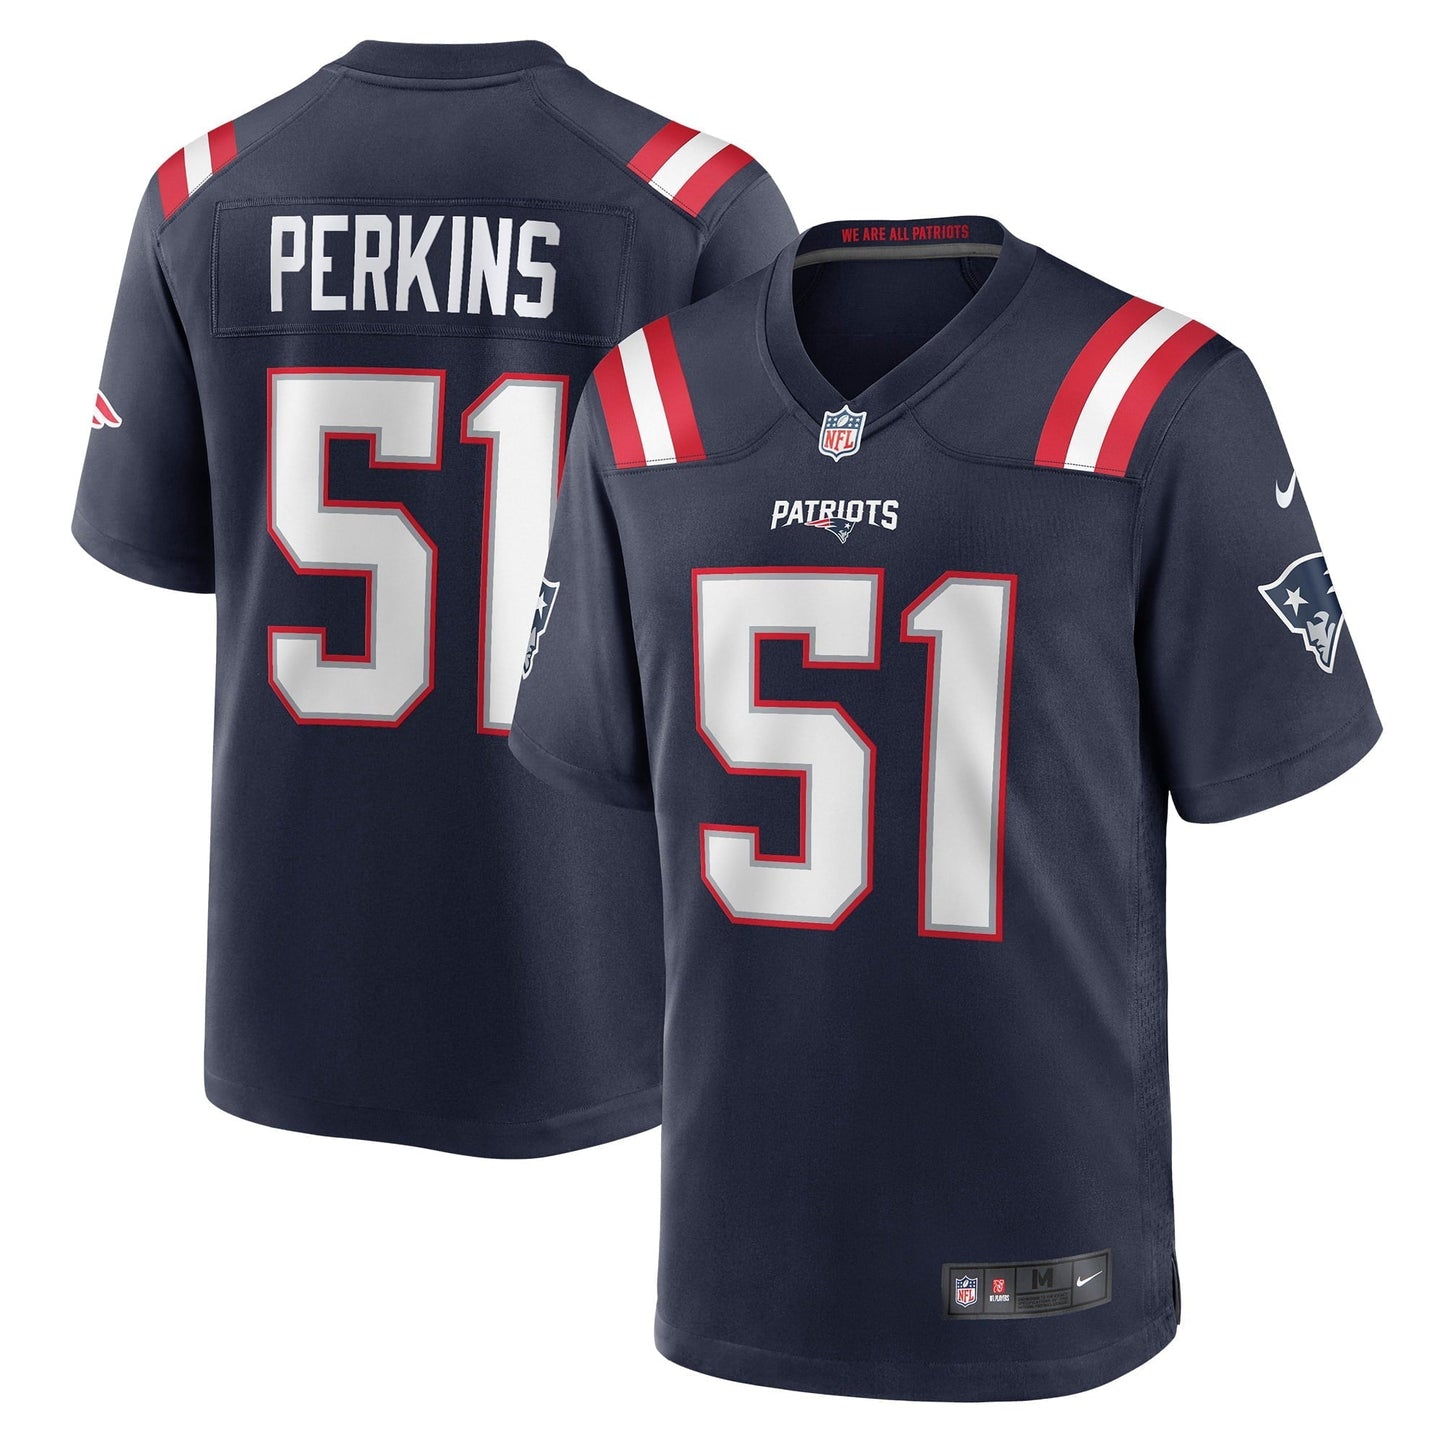 Men's Nike Ronnie Perkins Navy New England Patriots Game Jersey